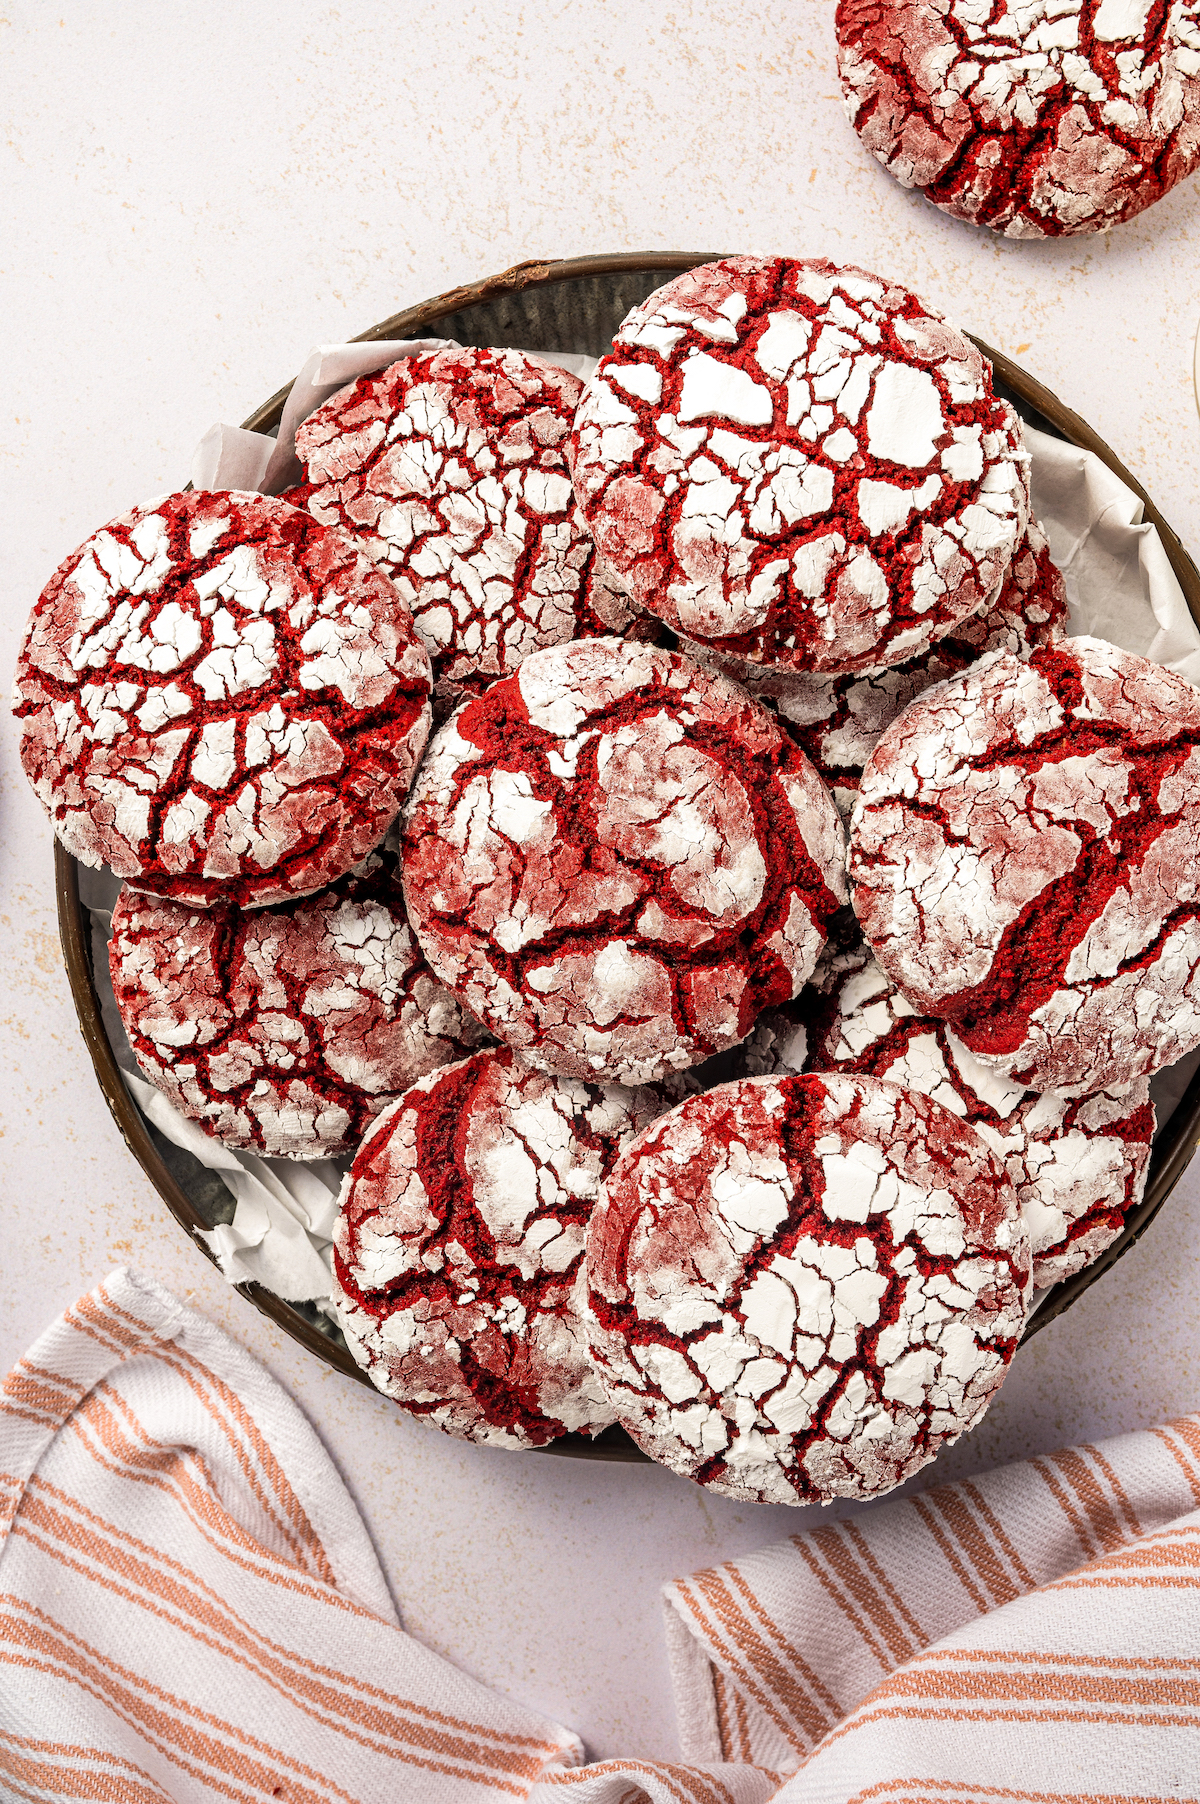 Overhead shot of a platter of red velvet crinkle cookies with a red and white cloth napkin.